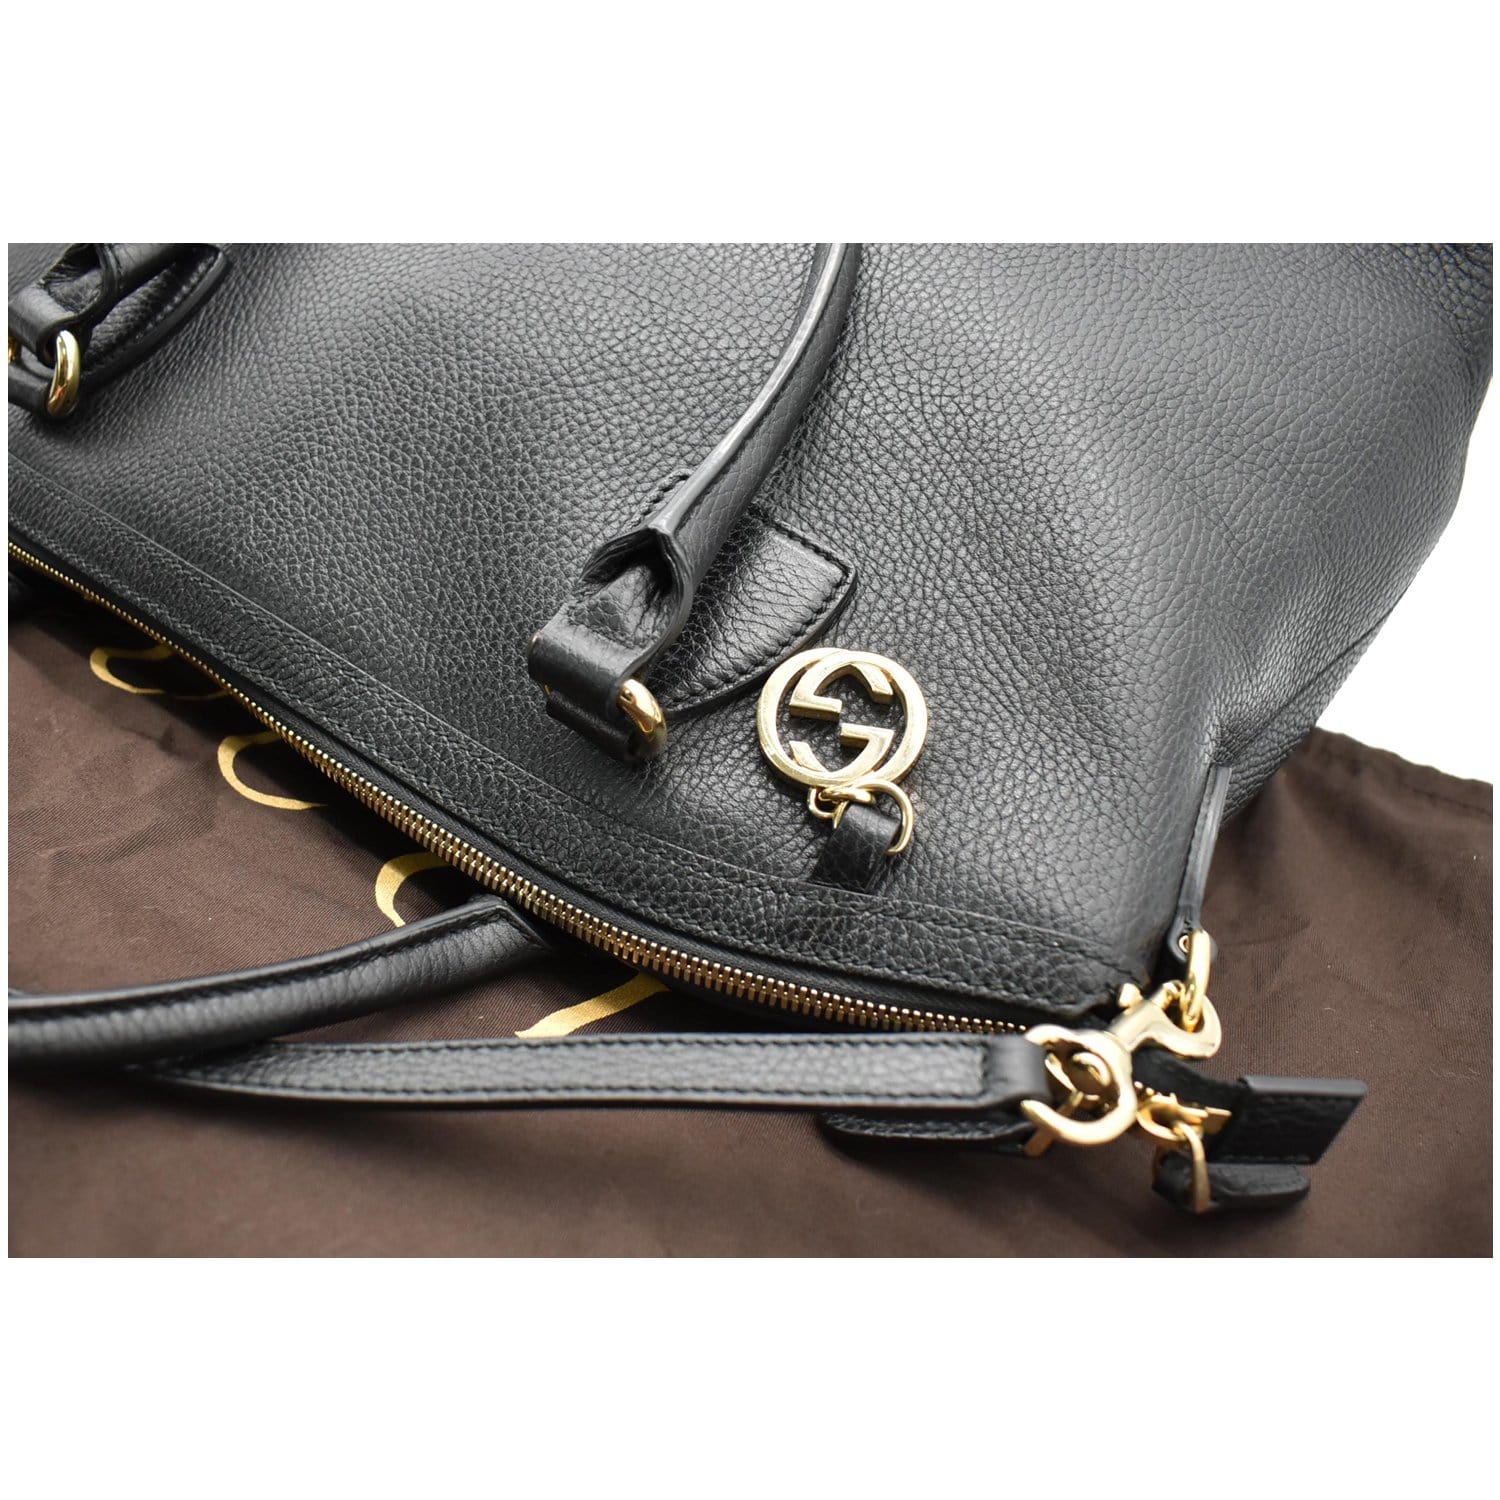 GUCCI Dome Large GG Charm Pebbled Leather Satchel Bag Black 449660